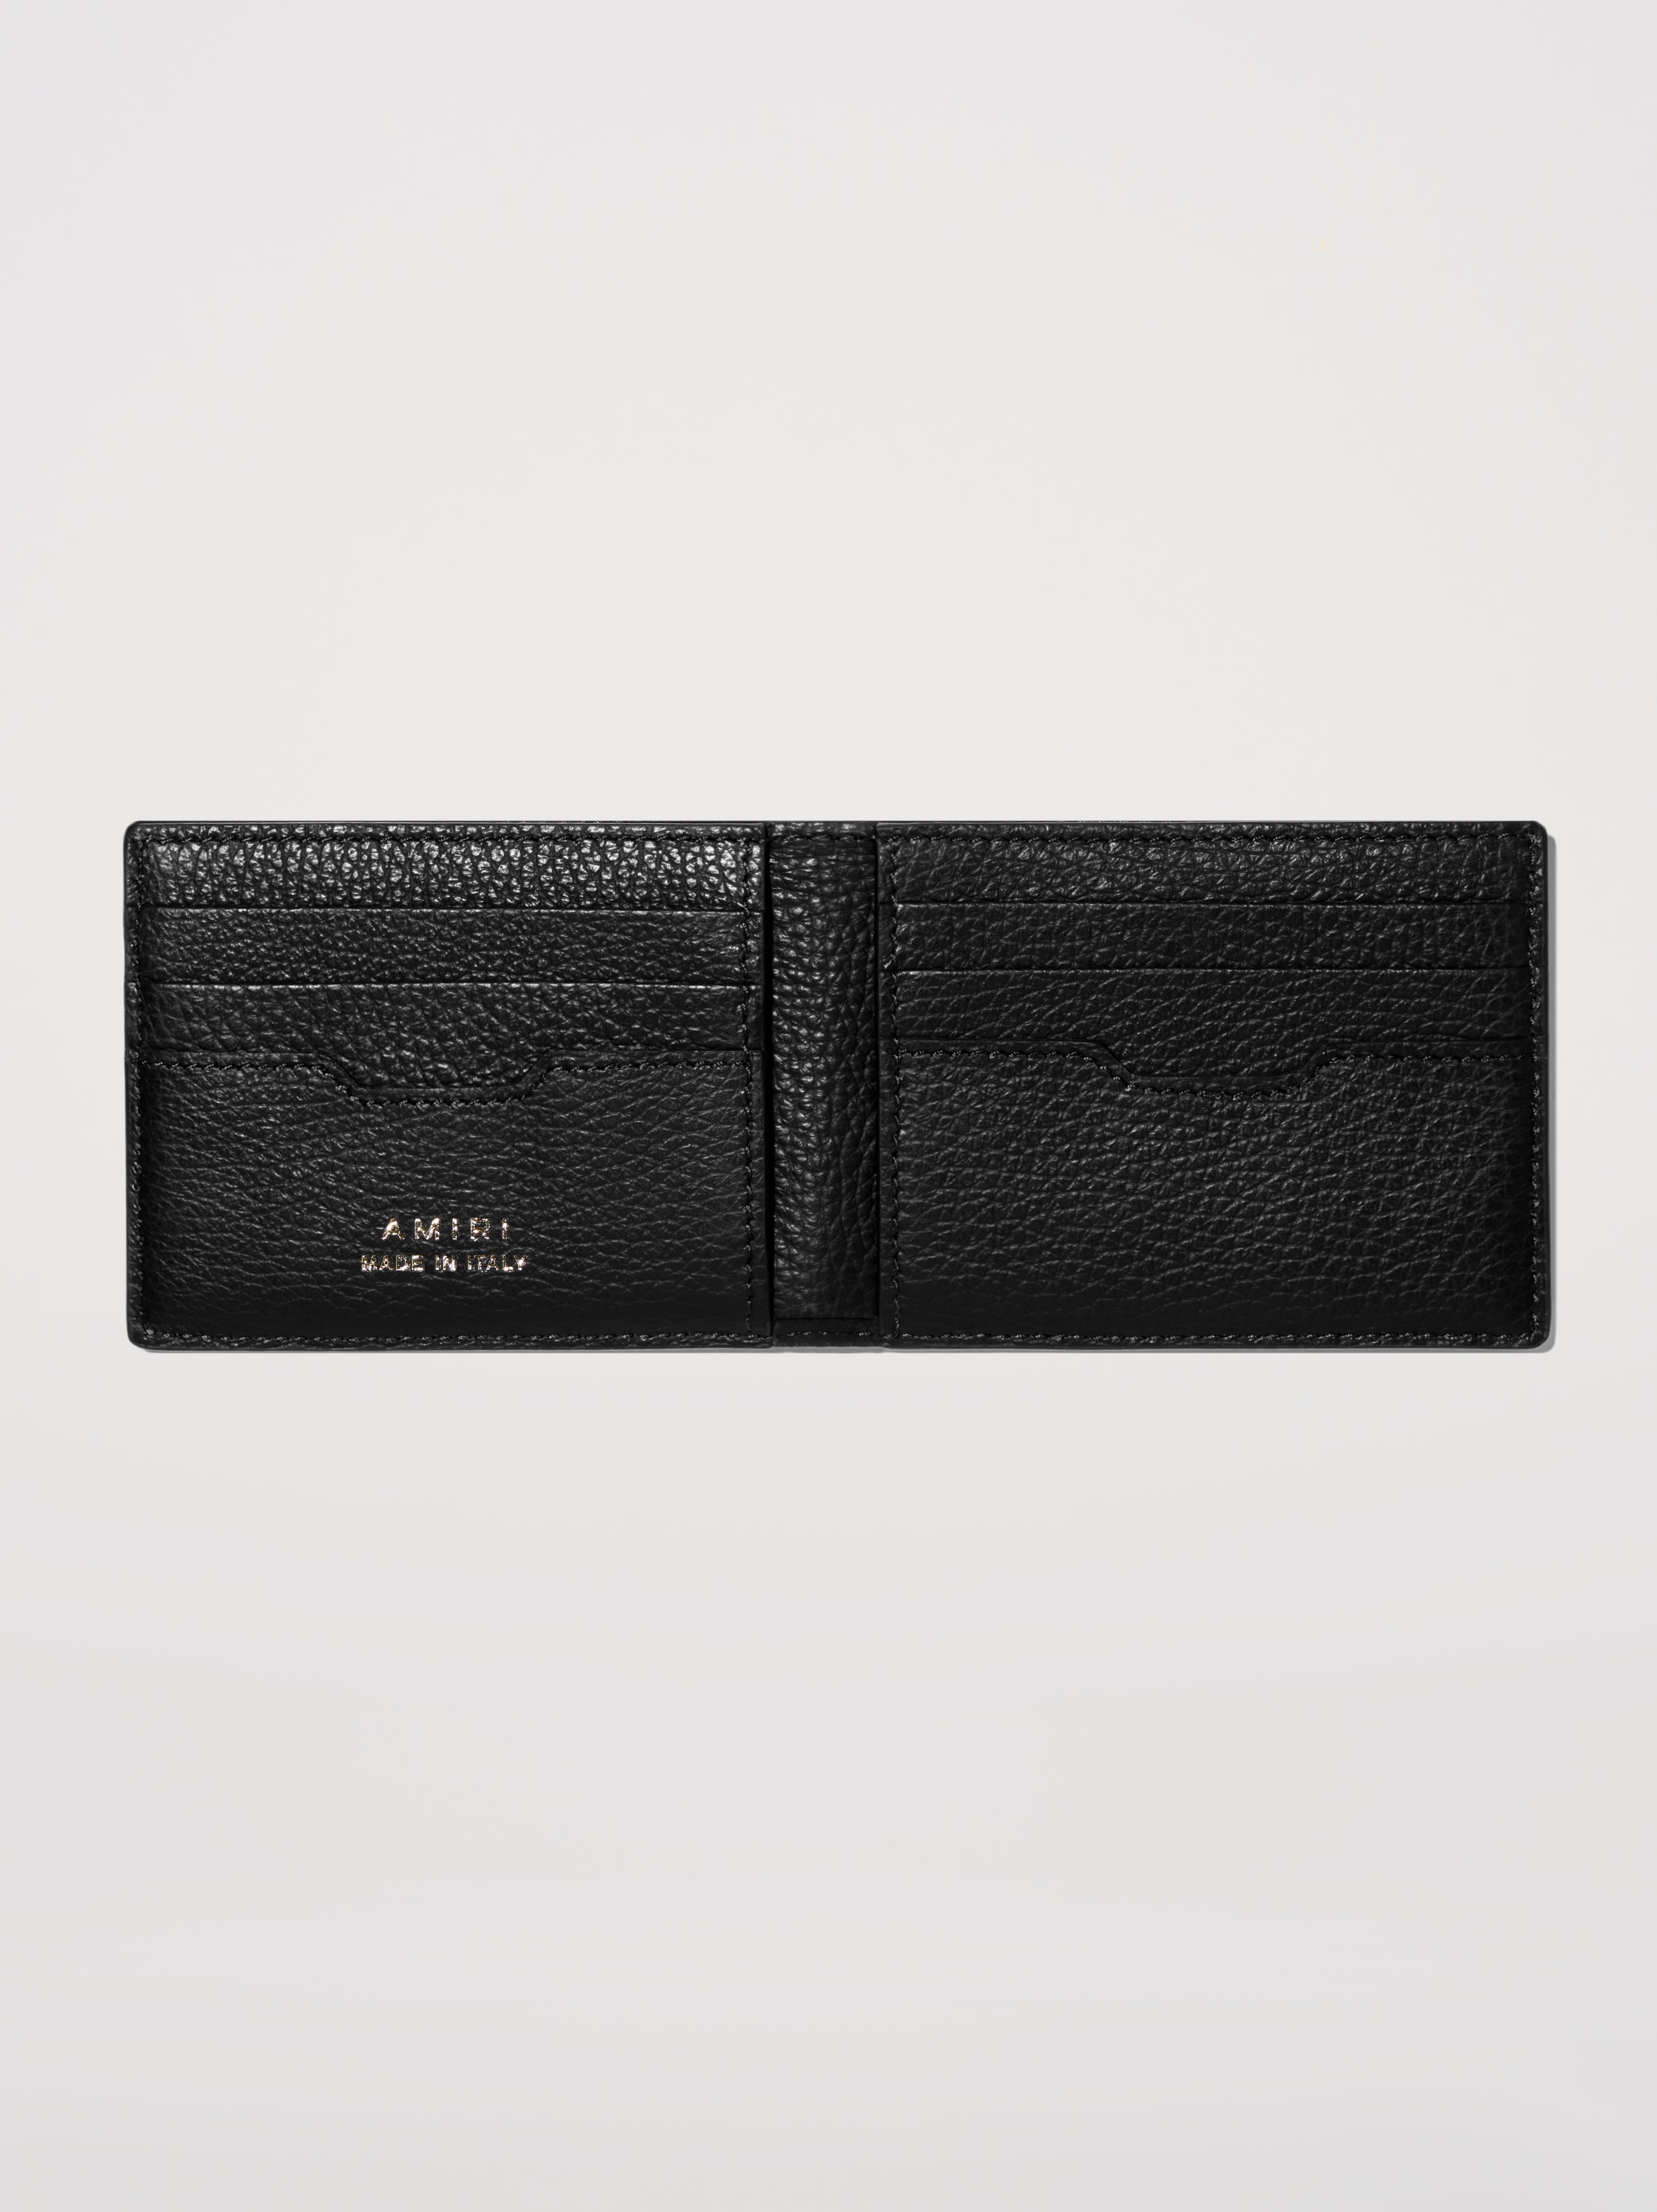 M.A. CLASSIC BIFOLD WALLET - 3